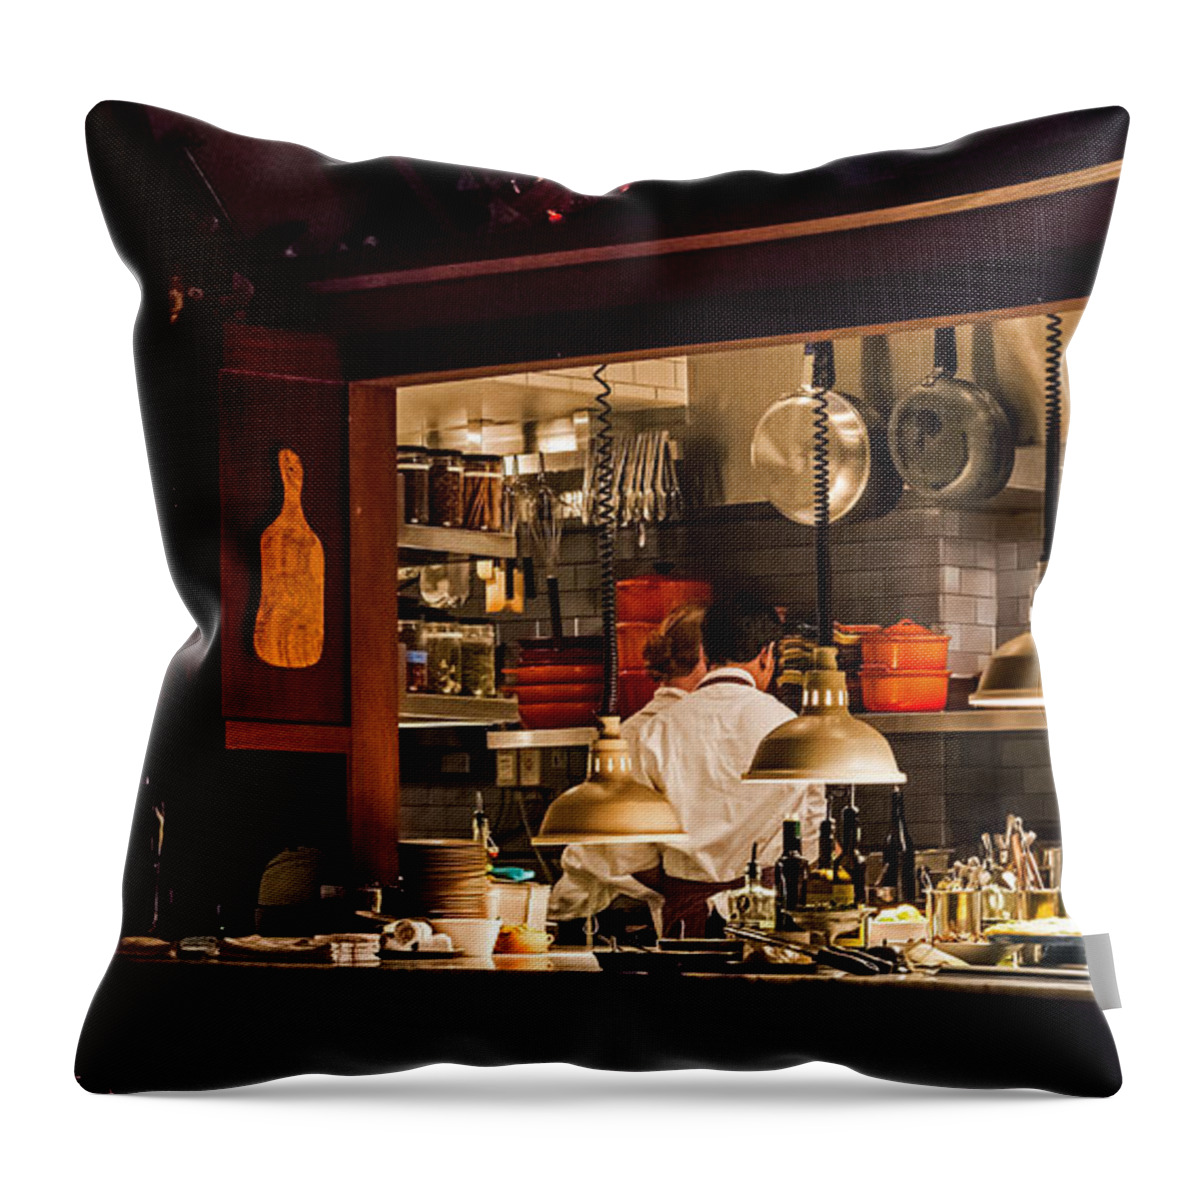 Interior Throw Pillow featuring the photograph Kitchen View by Kate Brown